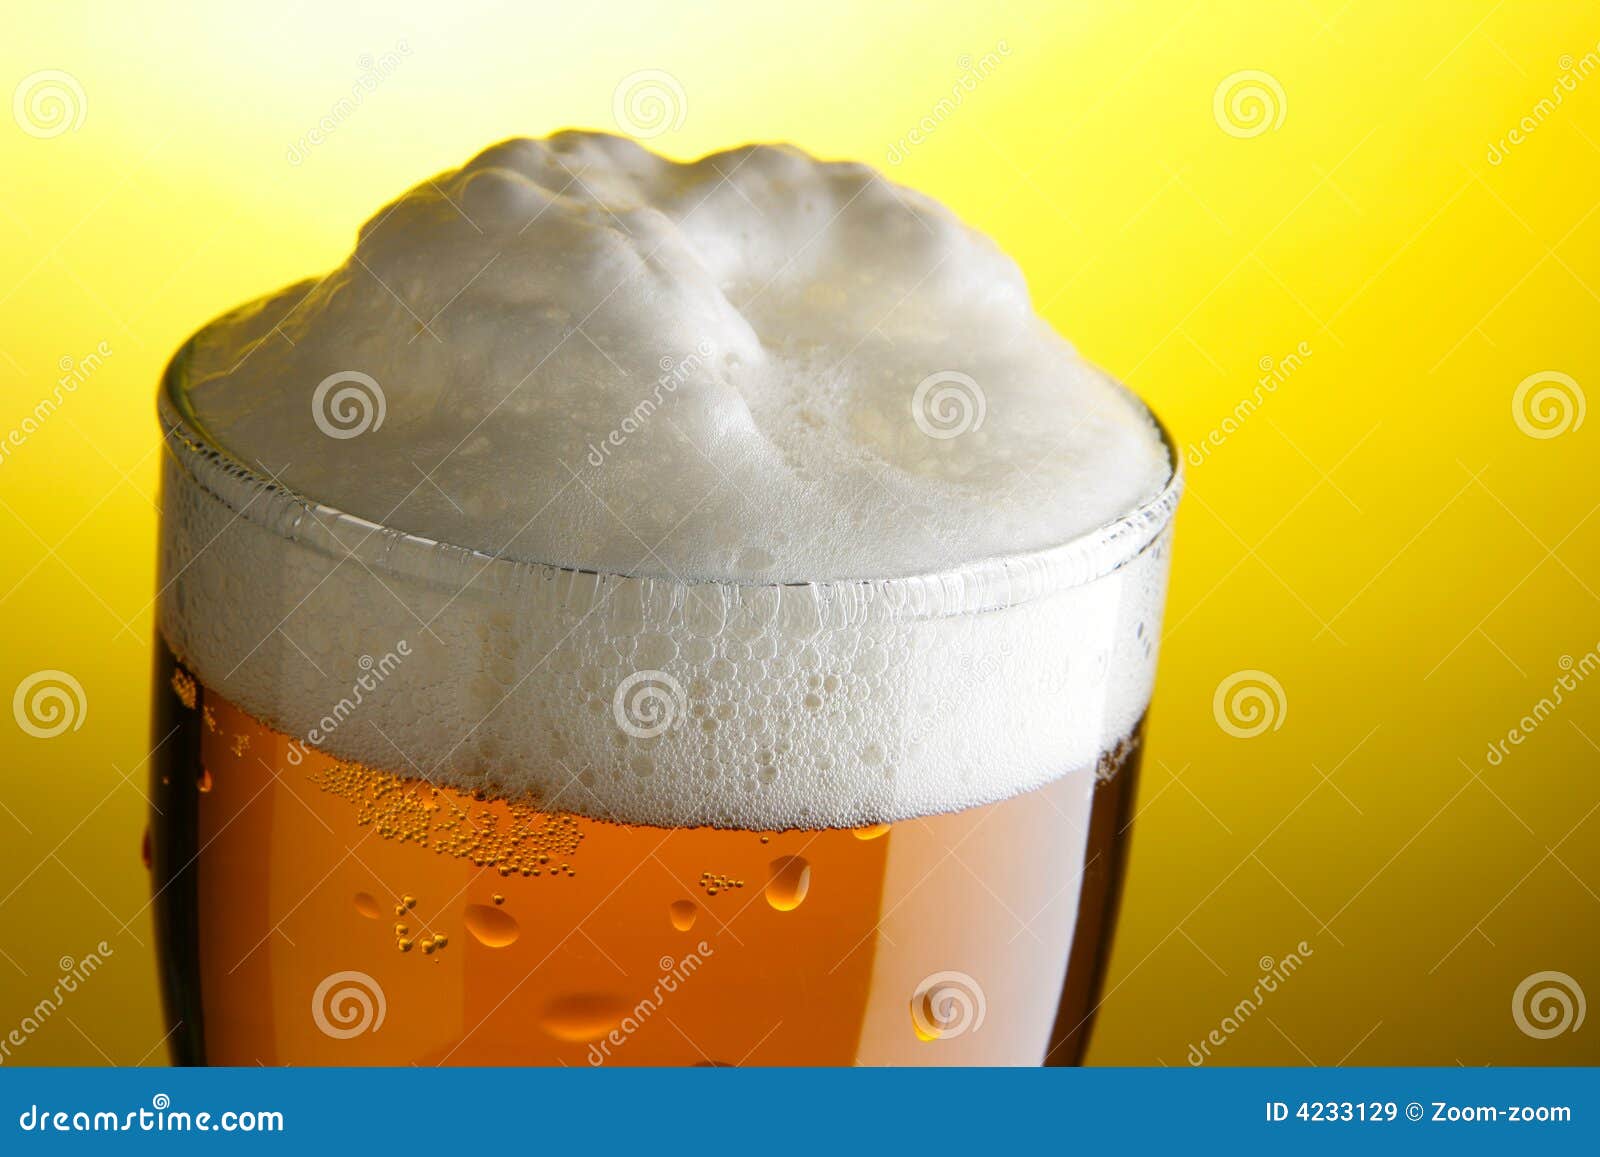 mug of beer with froth close-up